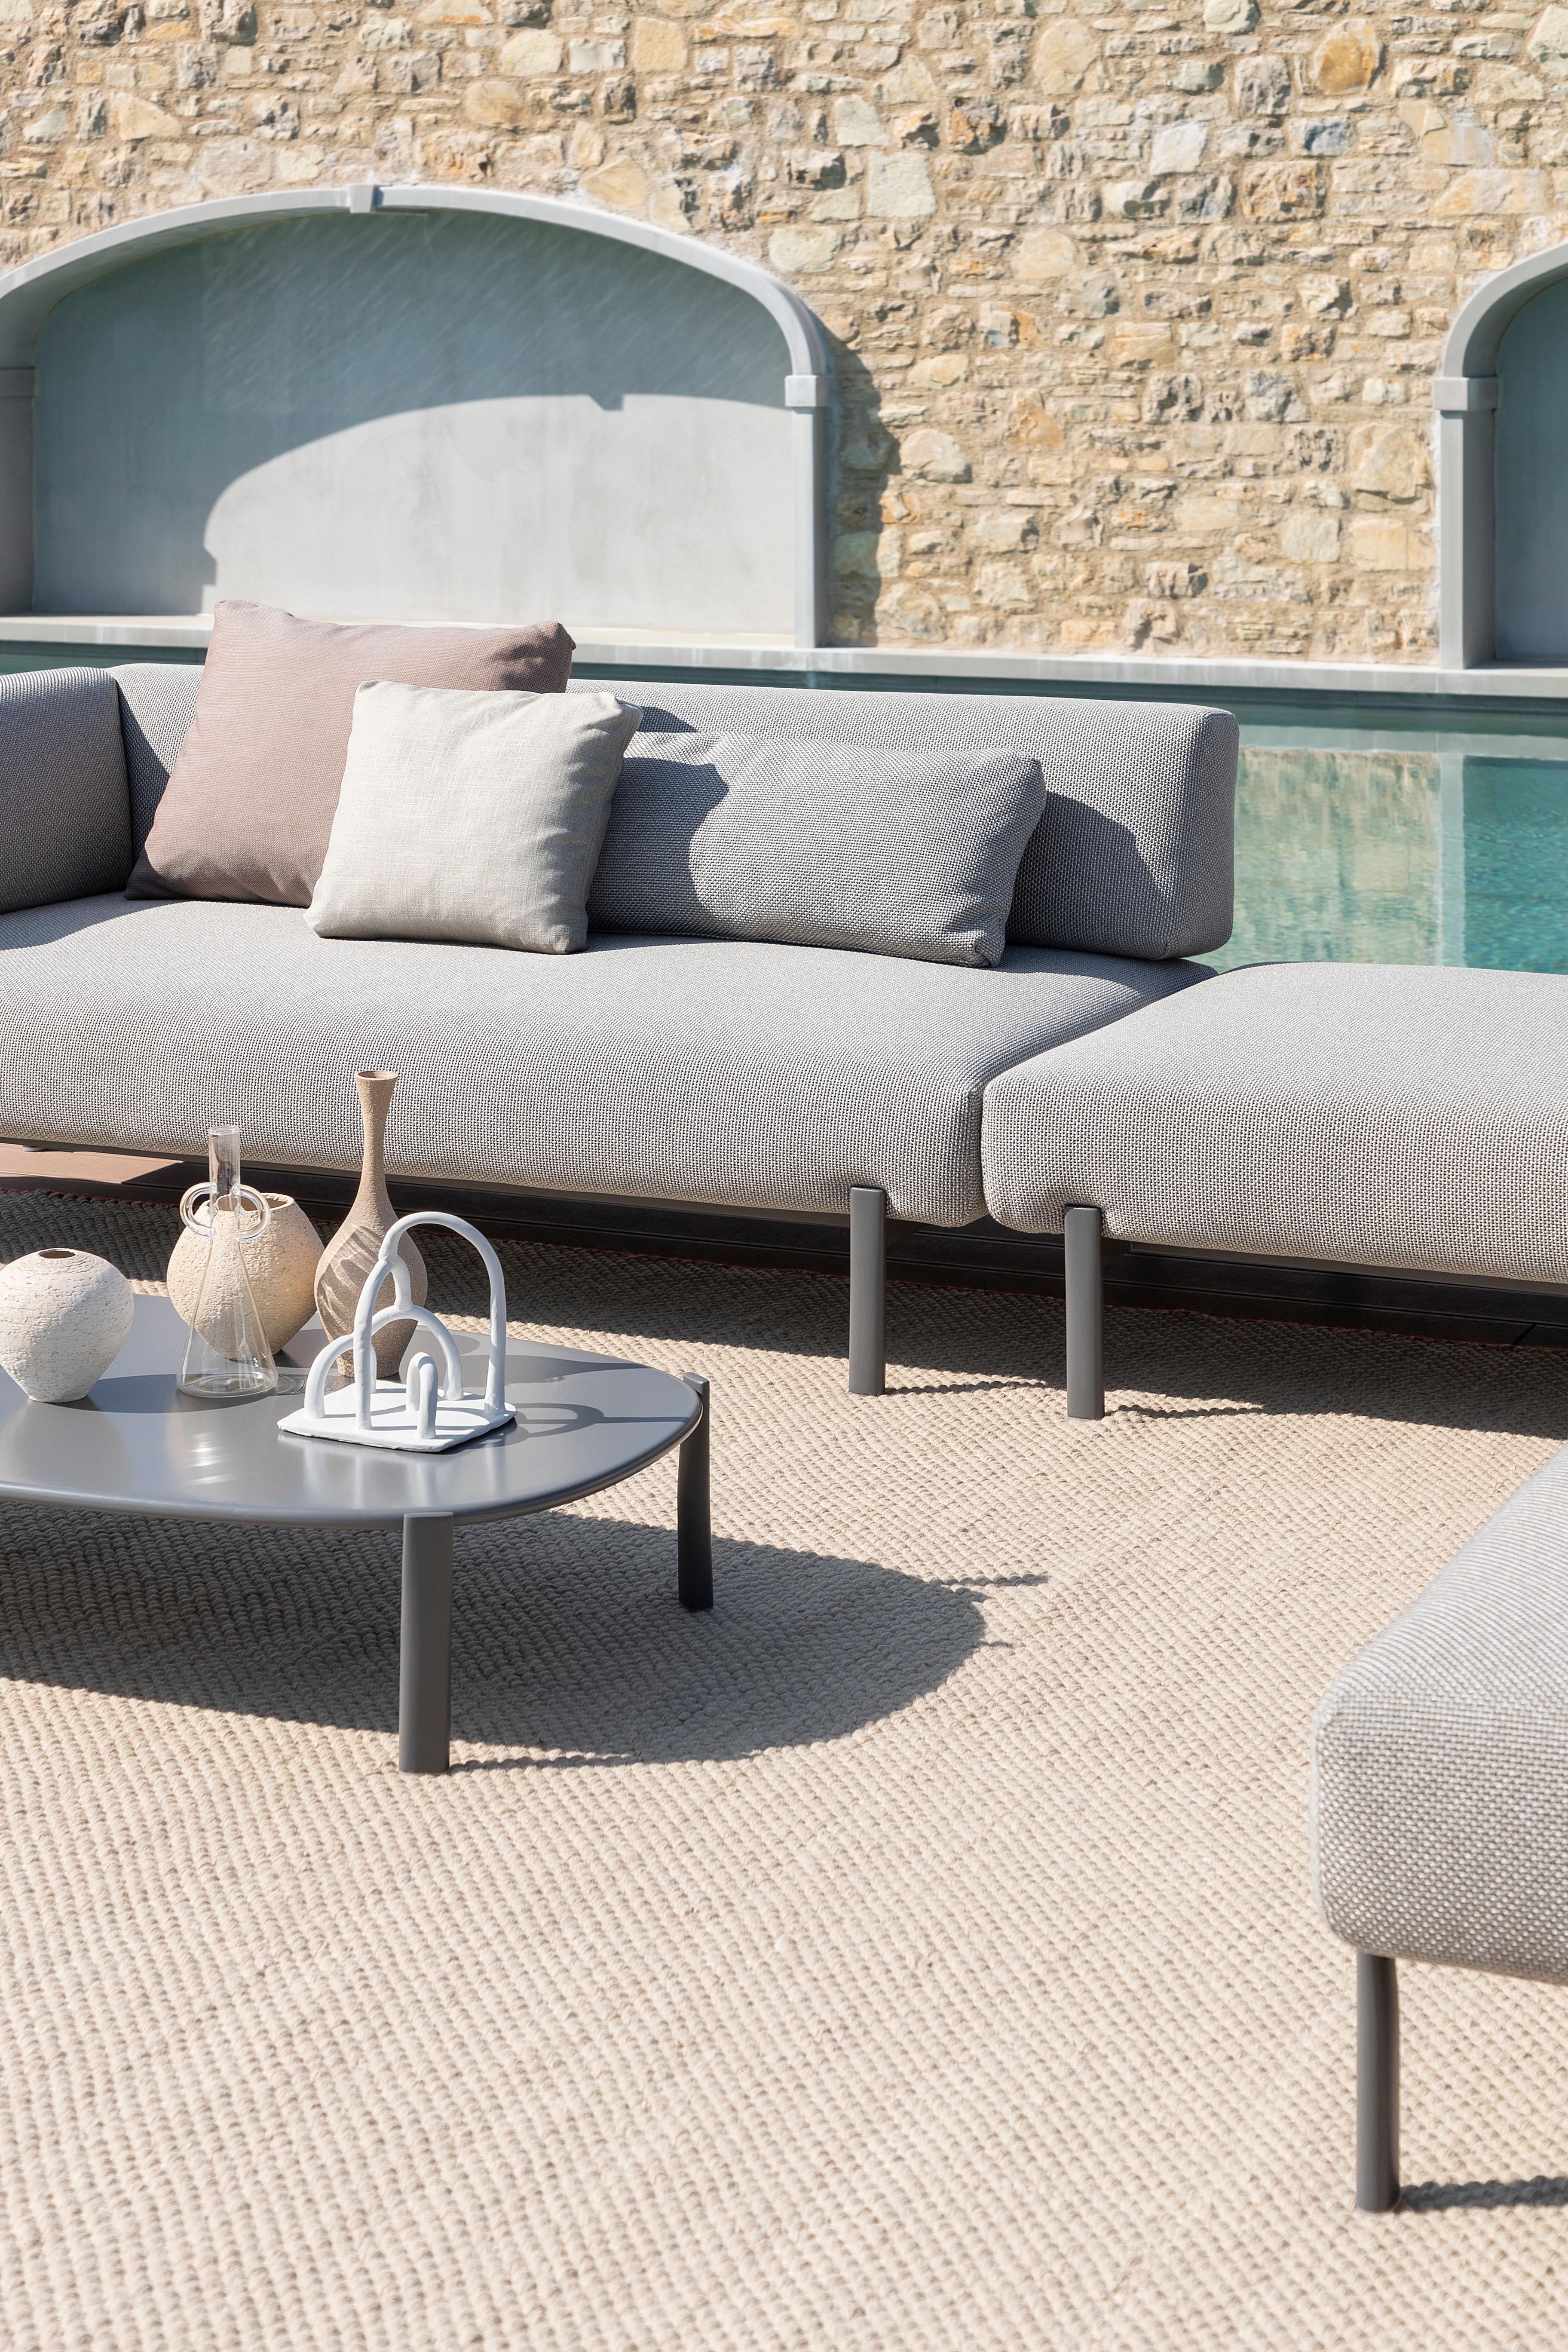 Alias T05_O SX Ten Angular Outdoor Sofa in Grey w Black Lacquered Aluminum Frame by PearsonLloyd

Modular corner element for outdoor use with lacquered die-cast aluminium legs and stainless steel frame.Seat, back and armrest with removable cover in